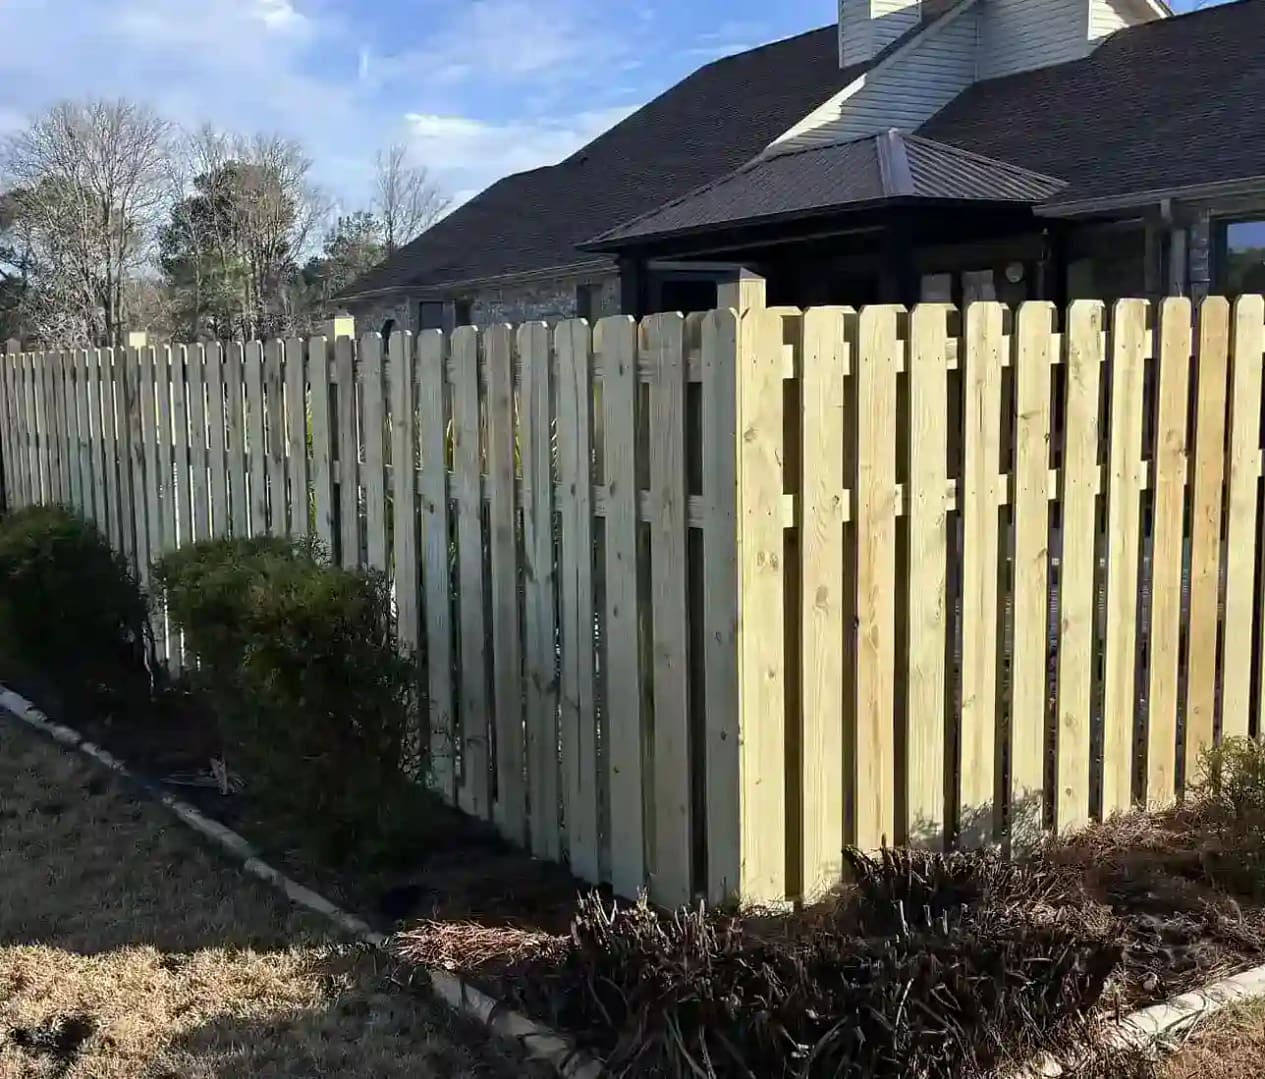 Element Fence Company builds Wood fences that offer a timeless charm and a surprising number of benefits for your property.